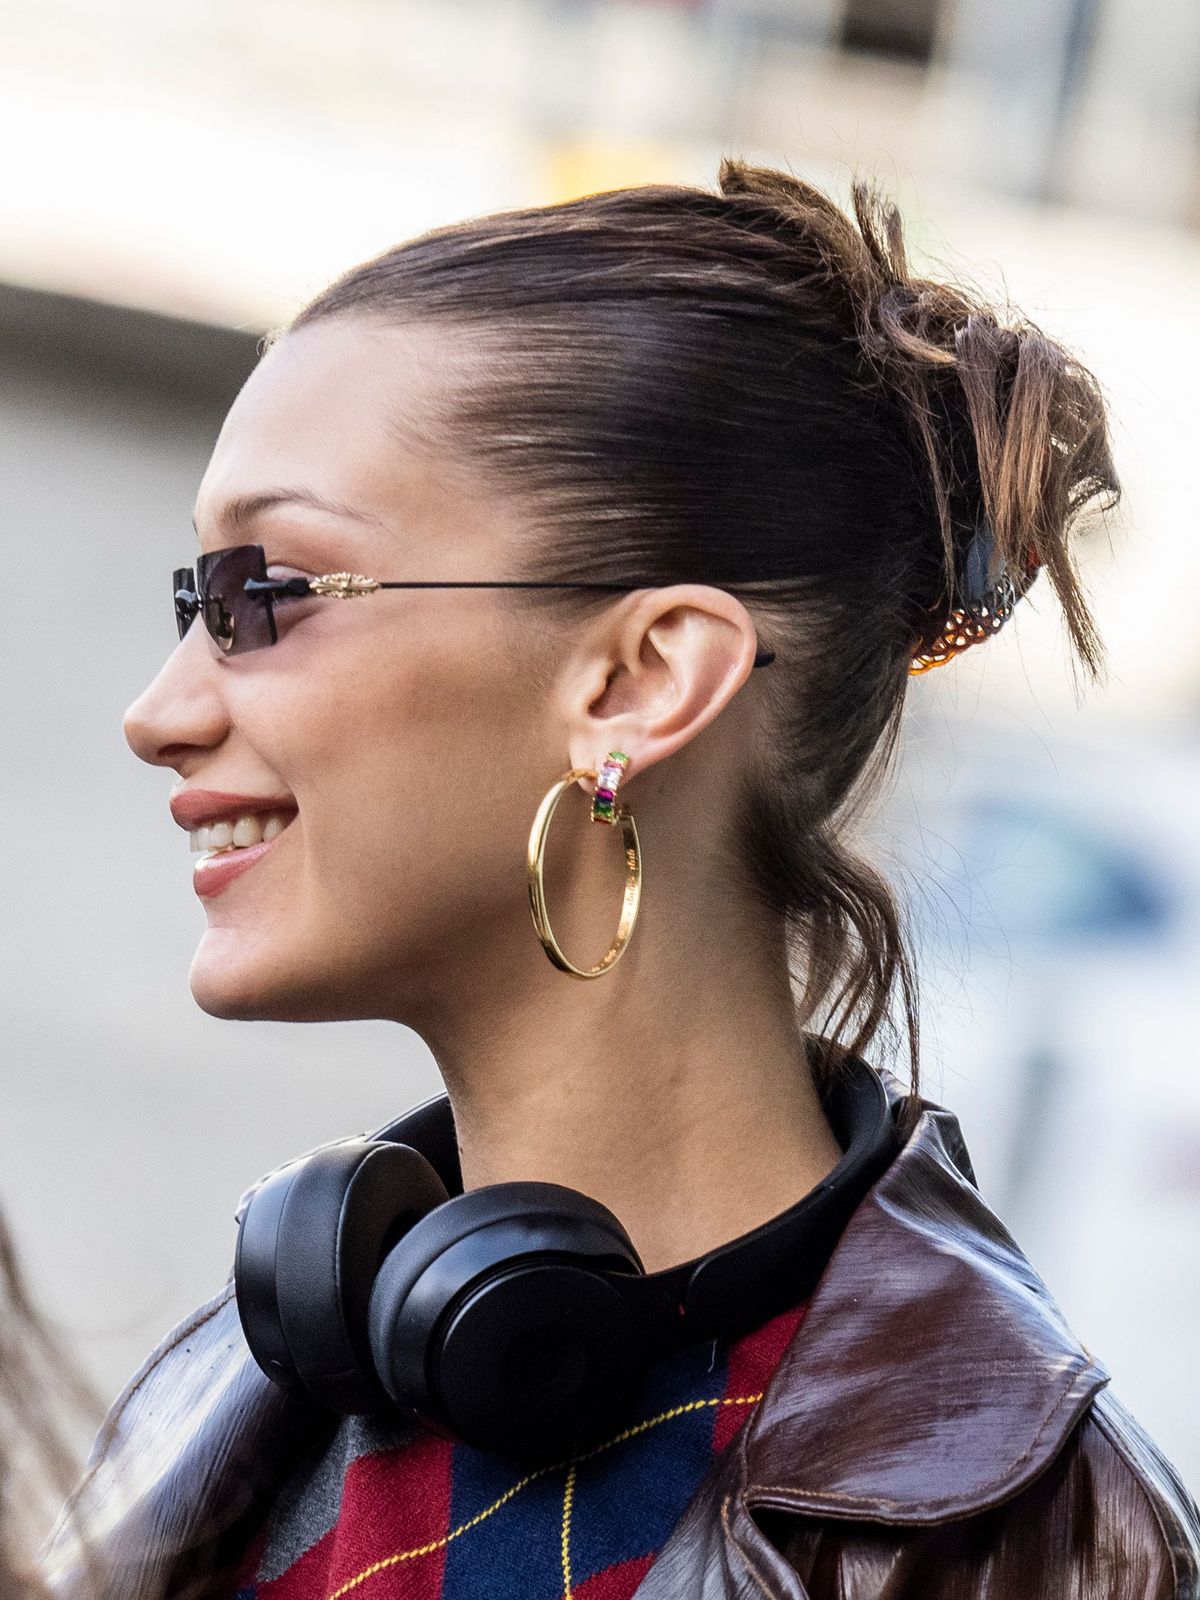 TikTok's latest trend: The 7 best over-ear headphones to invest in ...